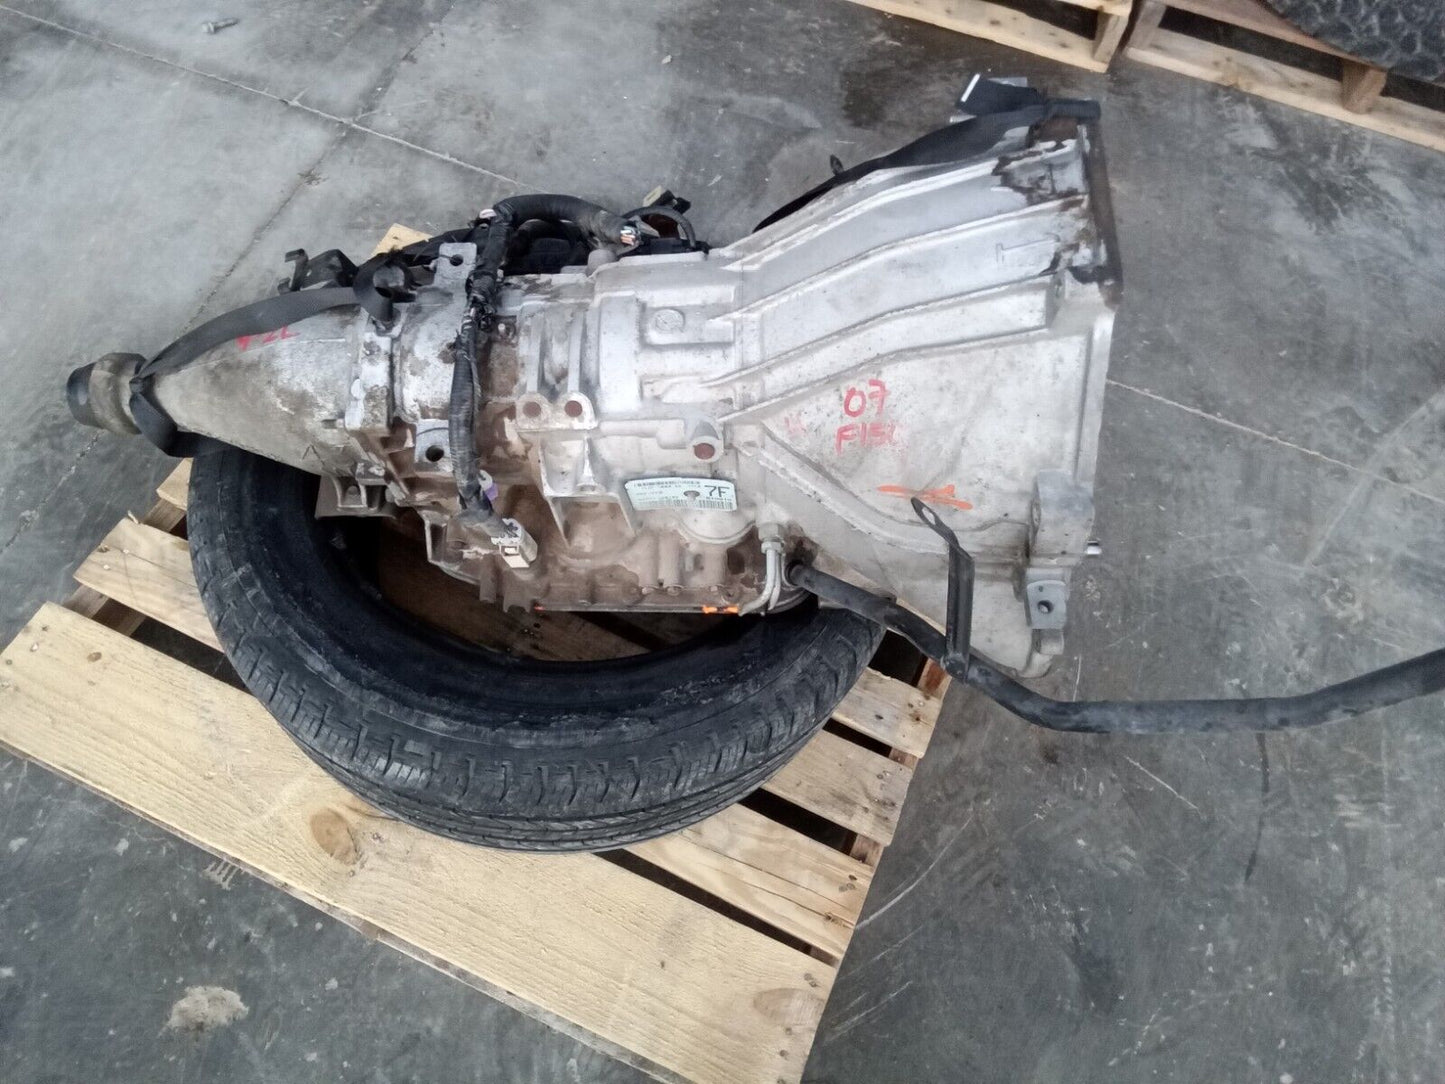 2007 2008 FORD F150 V6 4.2L 4X2 2WD AUTOMATIC TRANSMISSION ASSY 4R75E AT, 6-255